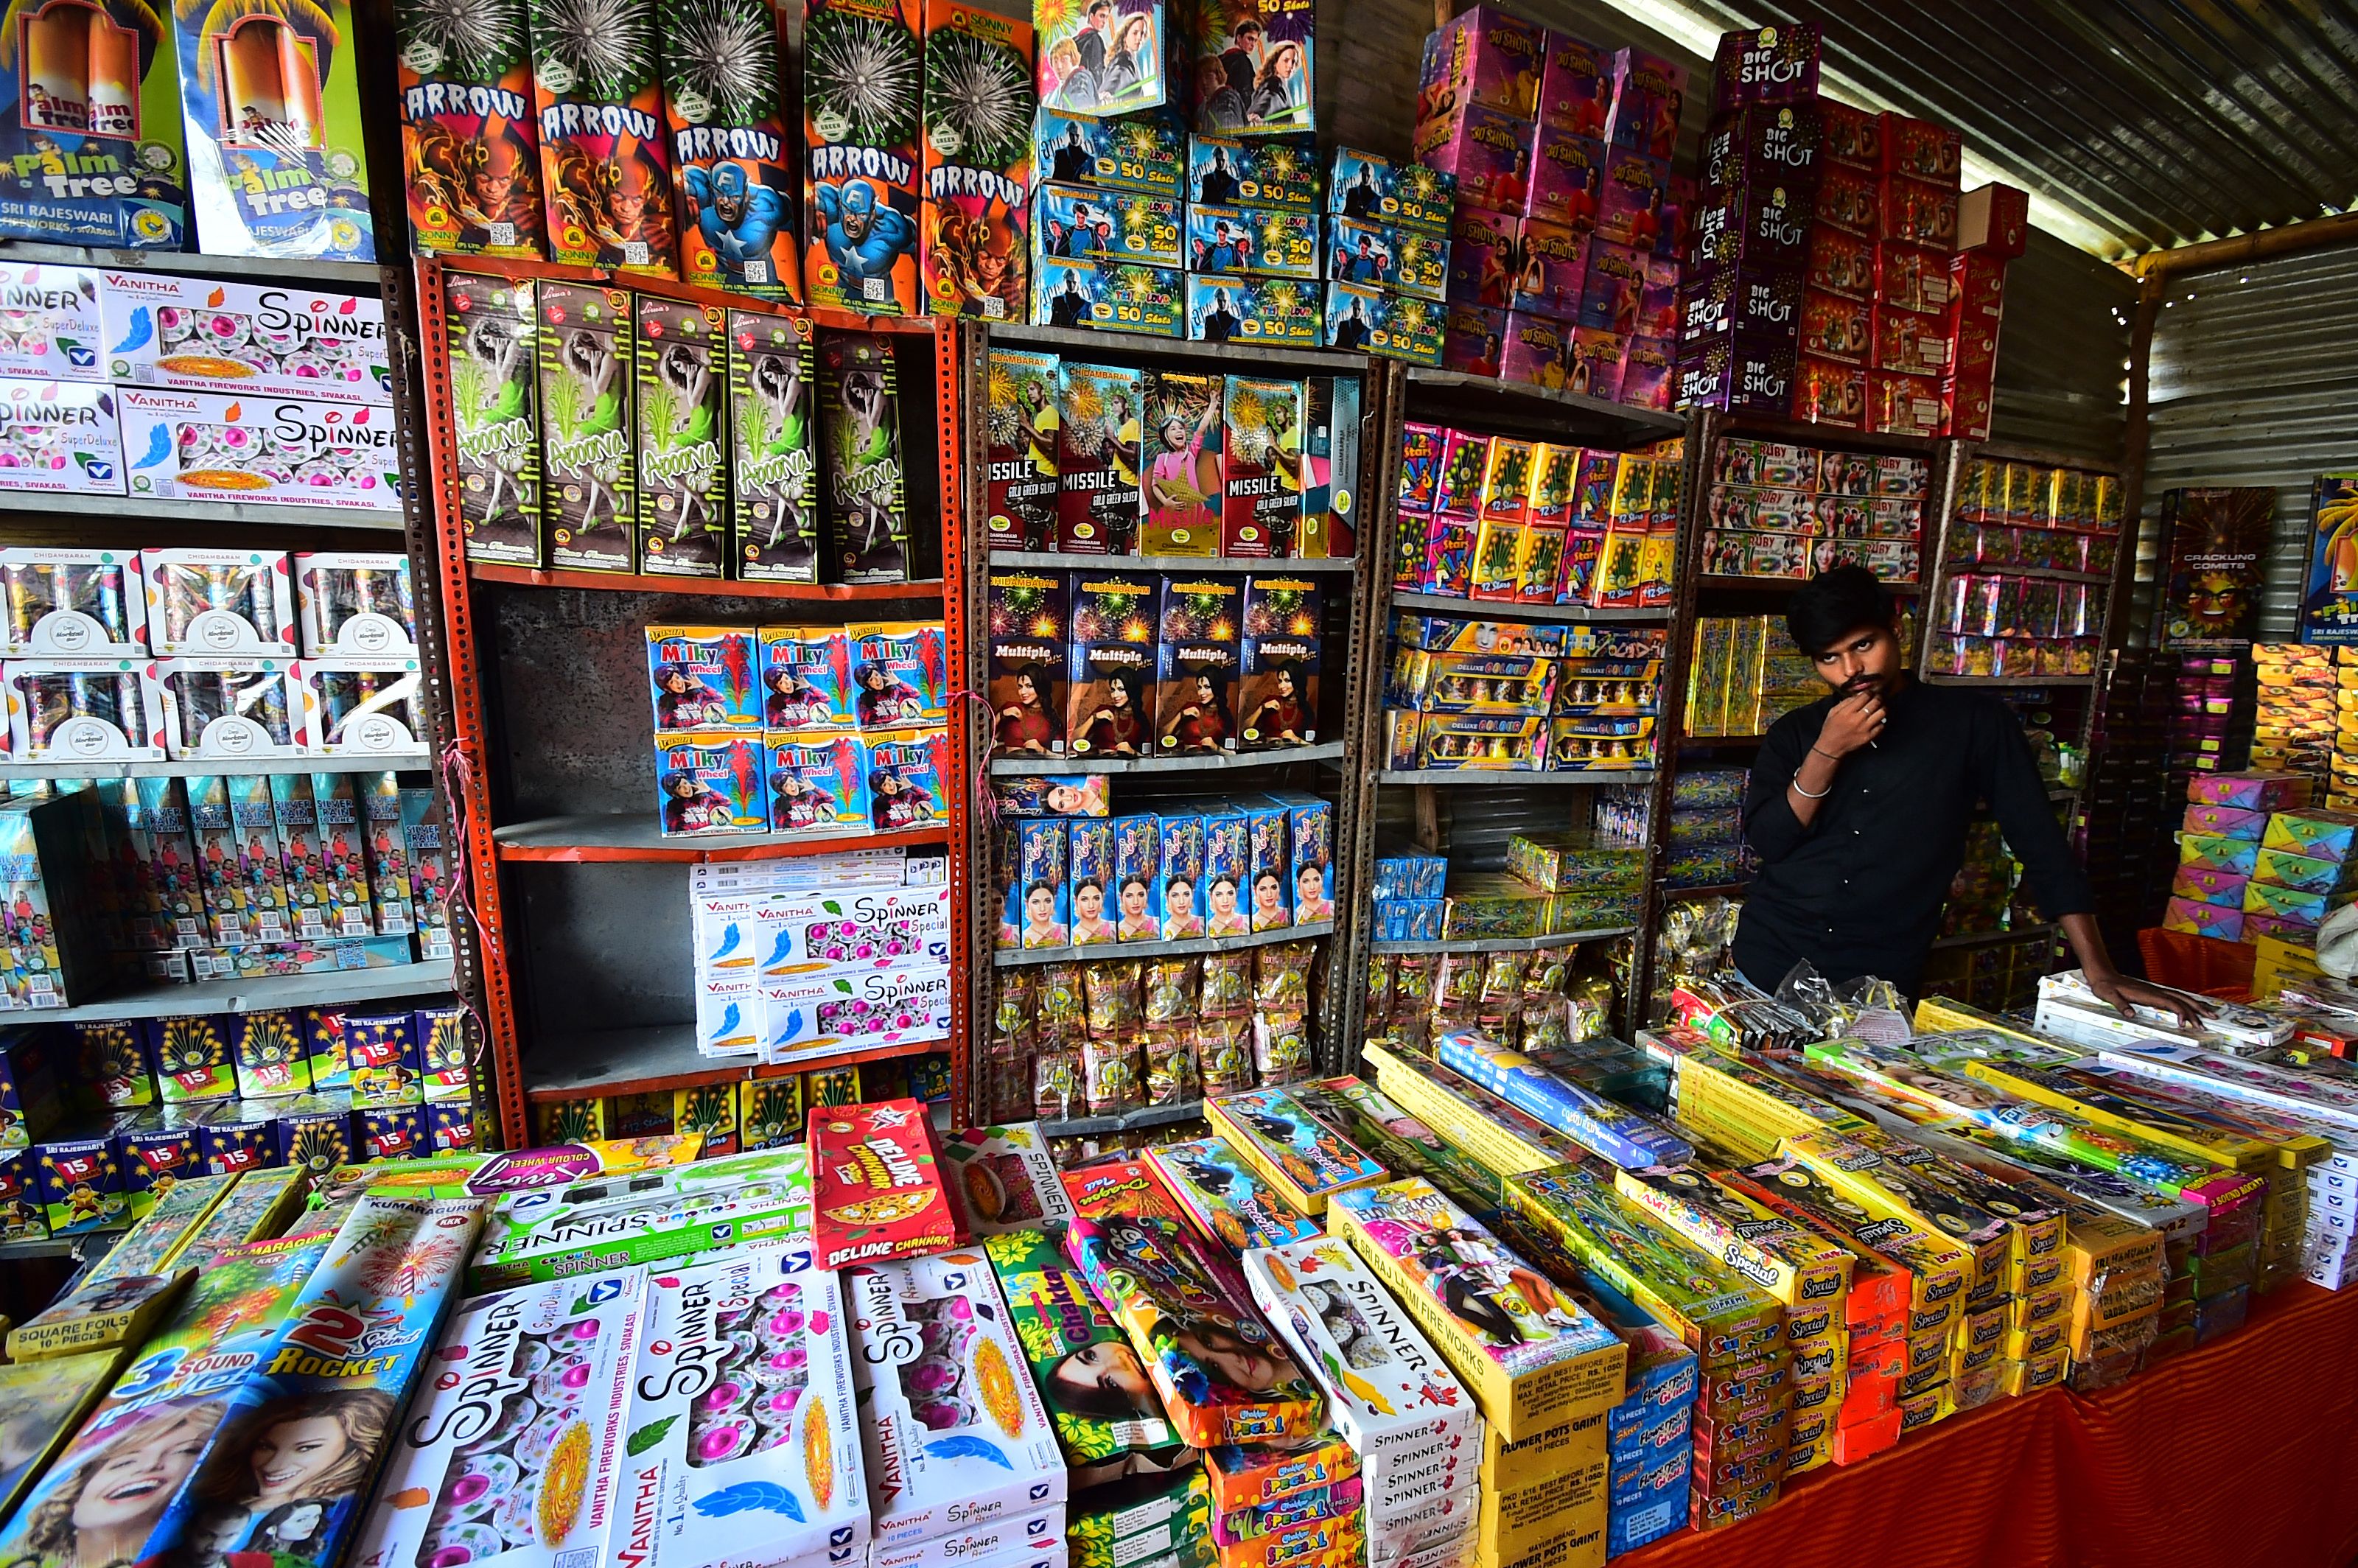 File: A vendor selling firecrackers wait for customers at a market ahead of the Hindu festival of Diwali, in Allahabad